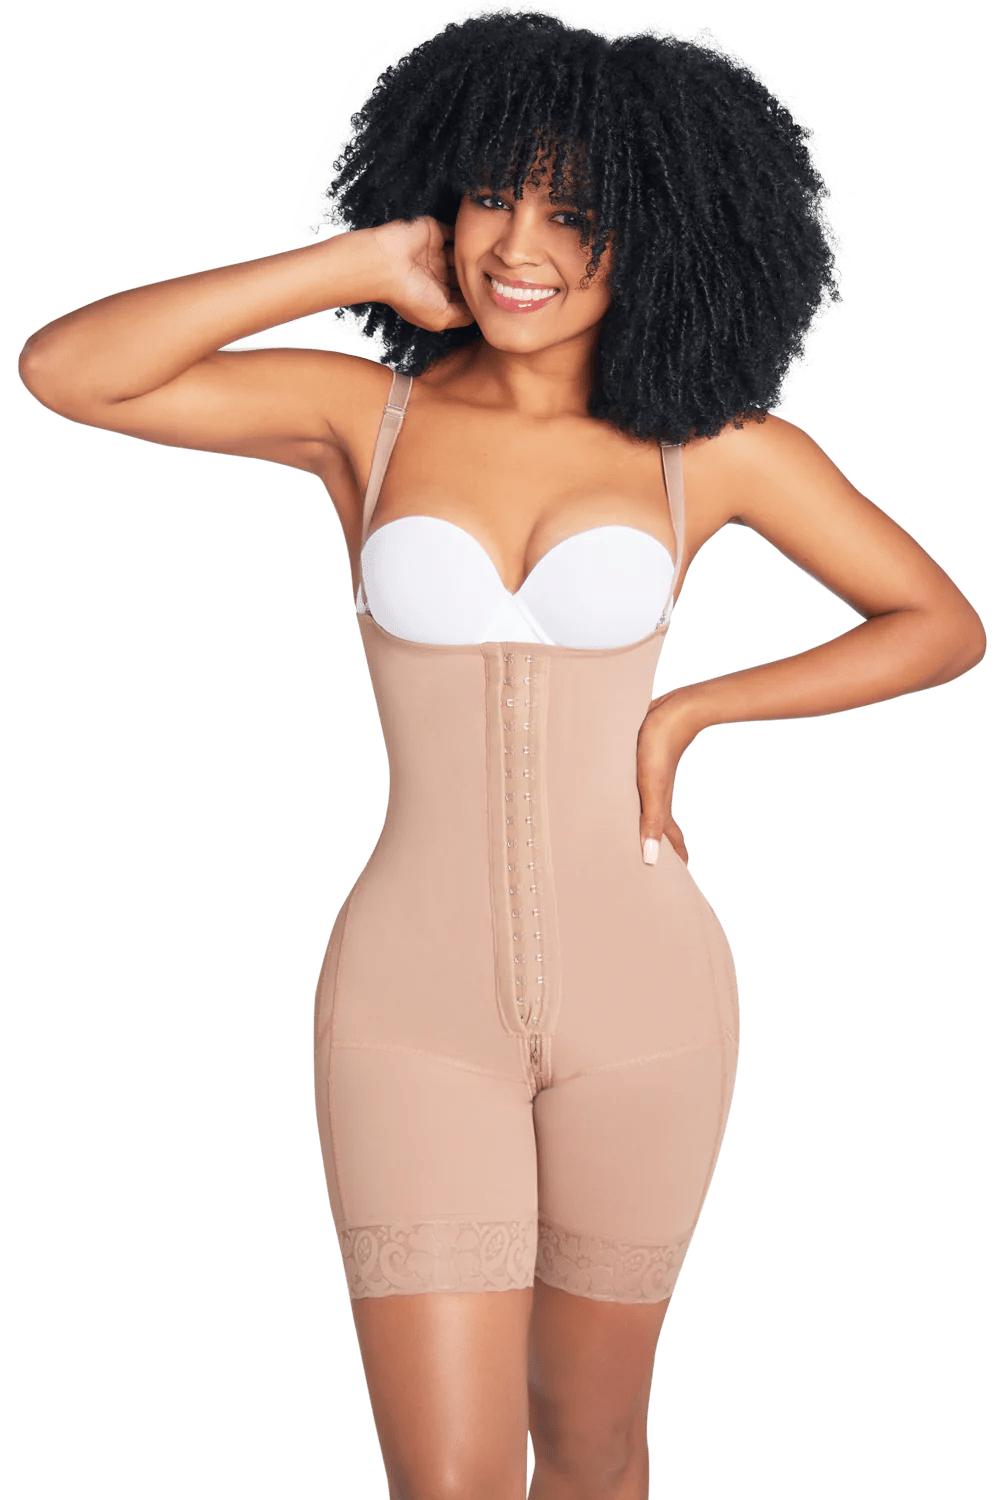 Ily Clothing Shapwear High Back Shorts Bodyshaper with Perineal Zipper